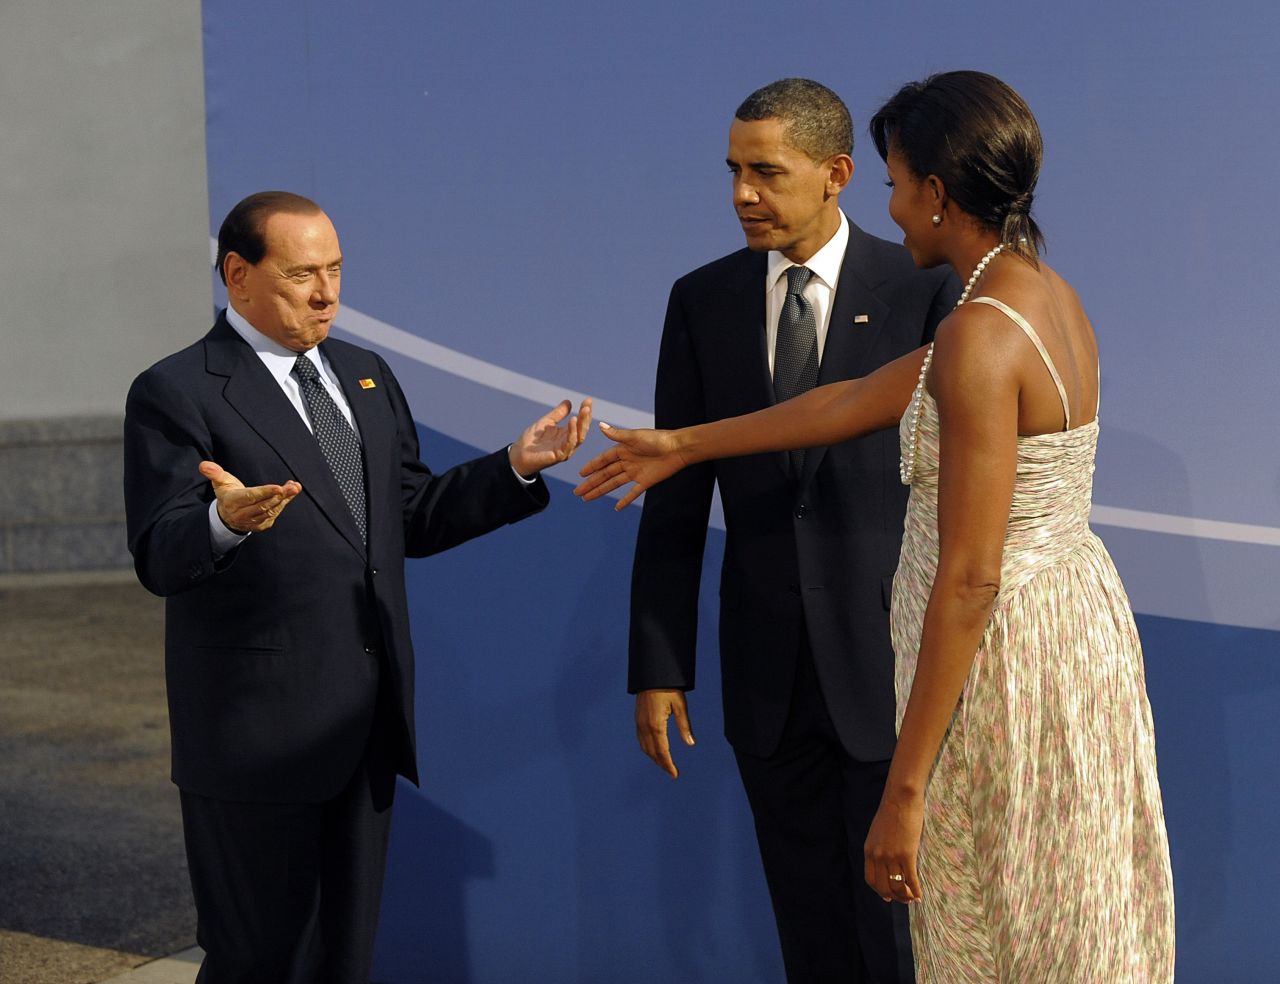 President Barack Obama and first lady Michelle Obama welcome Berlusconi to a G20 dinner in Pittsburgh in September 2009.